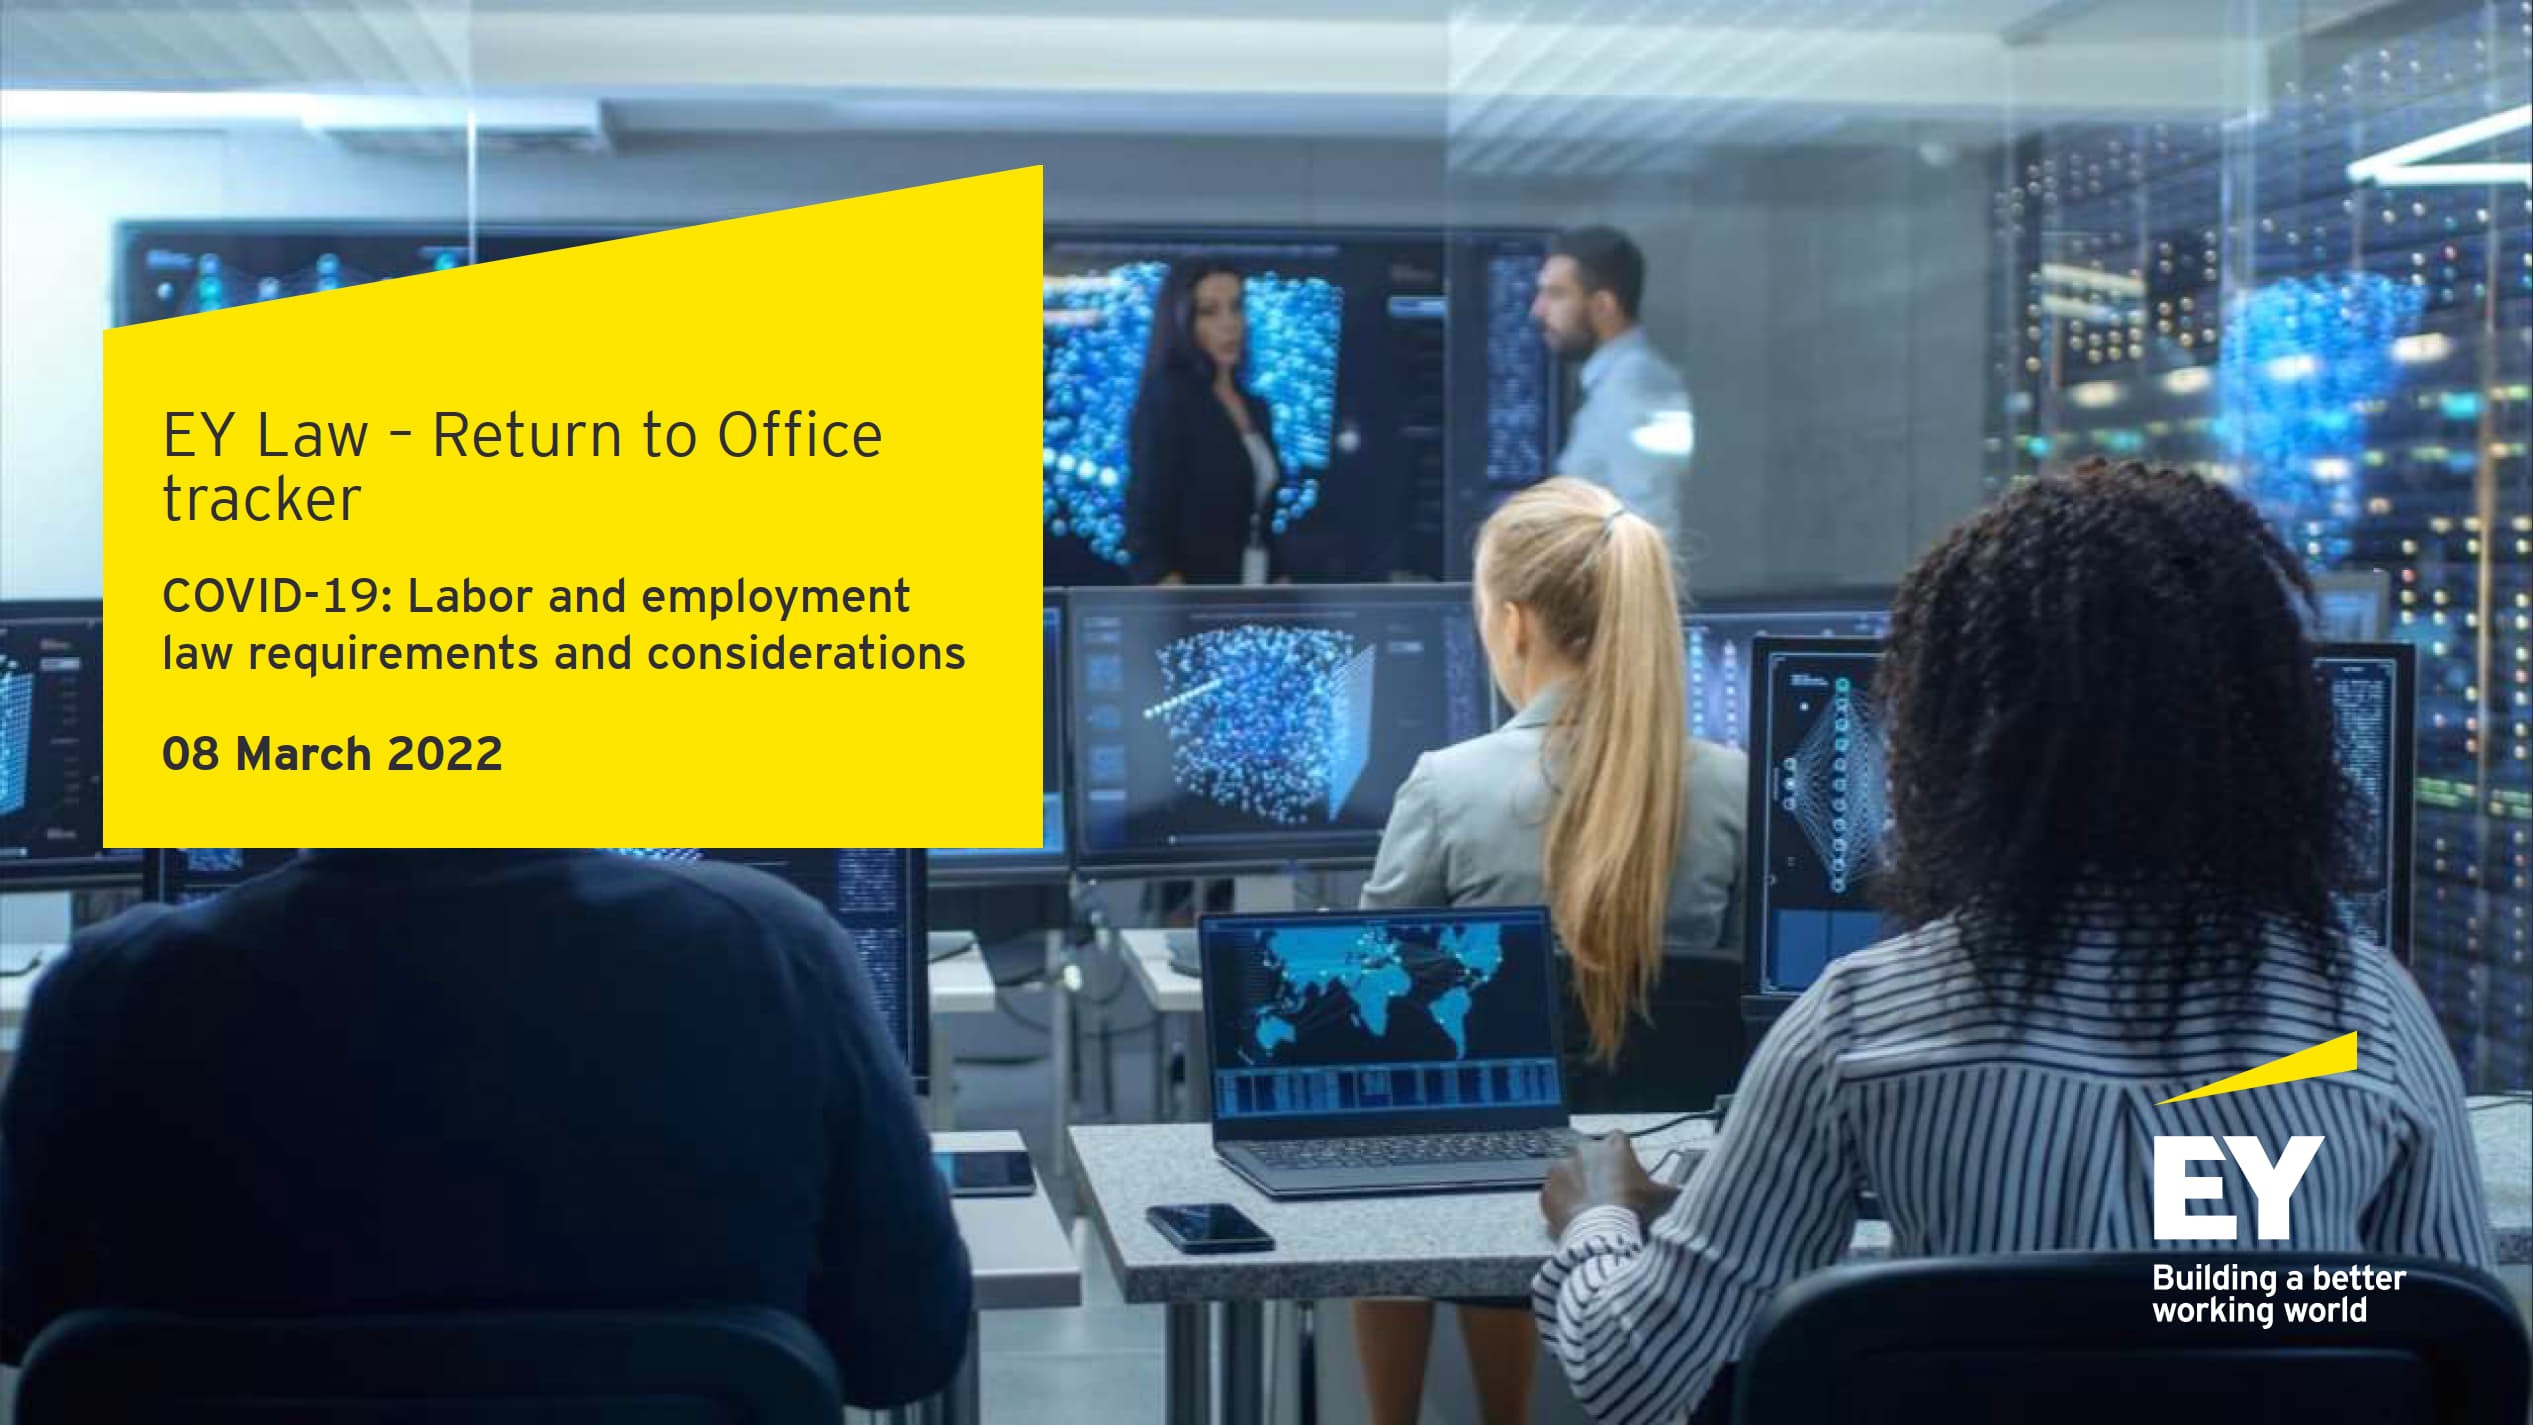 EY Law – Return to Office tracker COVID-19: Labor and employment law requirements and considerations, 08 March 2022